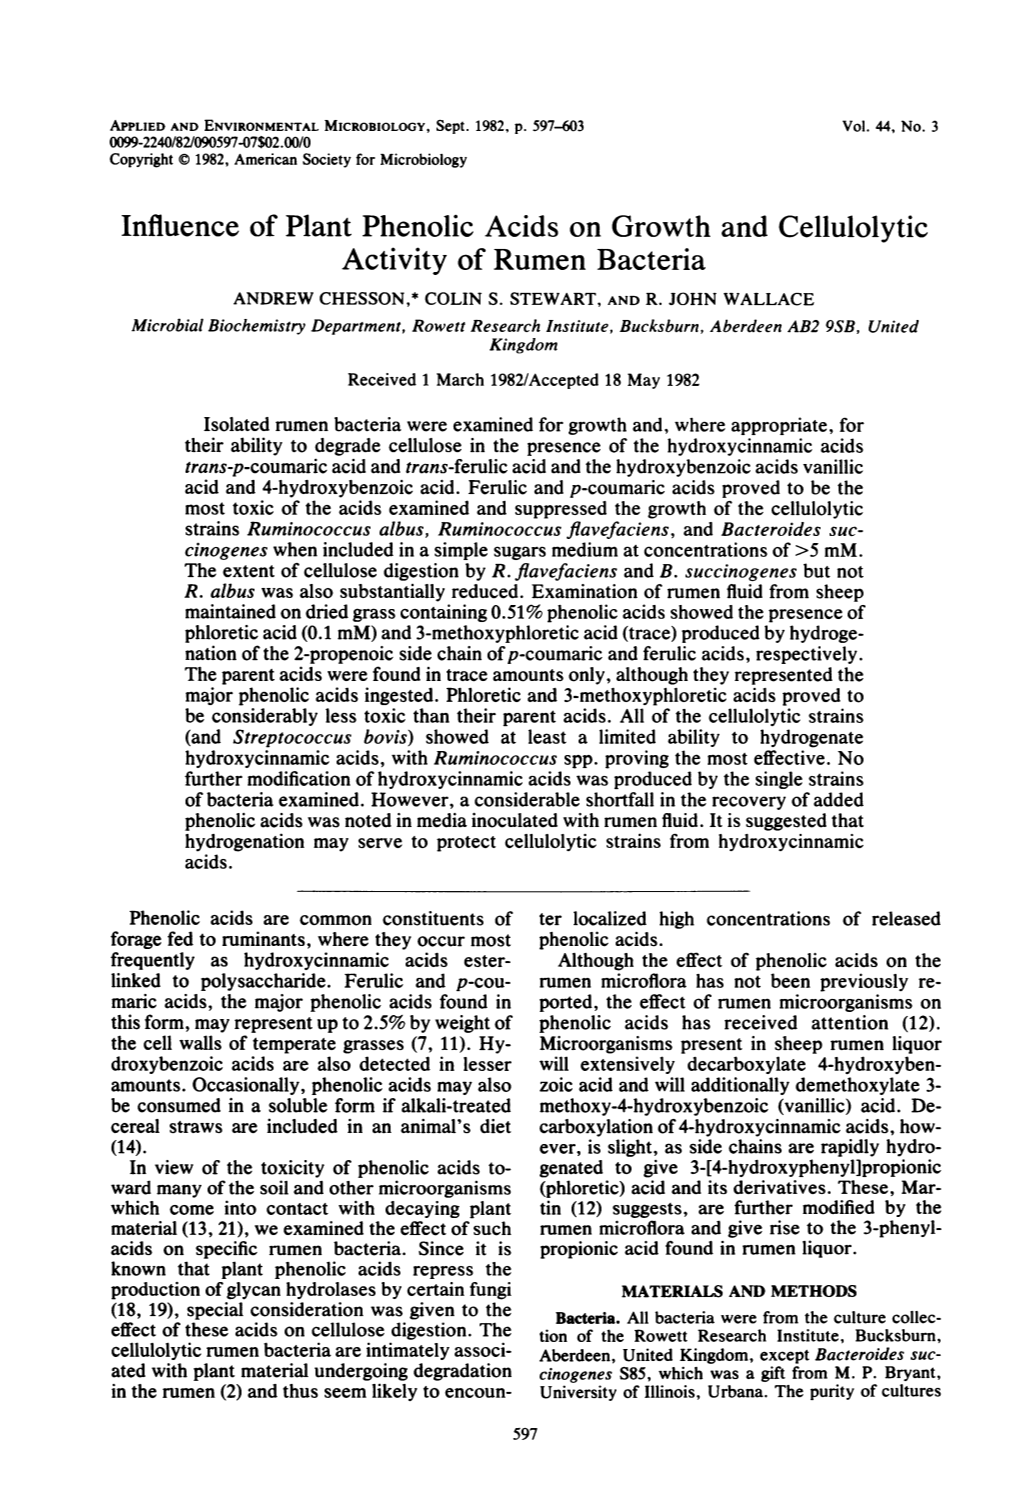 Influence of Plant Phenolic Acids on Growth and Cellulolytic Activity of Rumen Bacteria